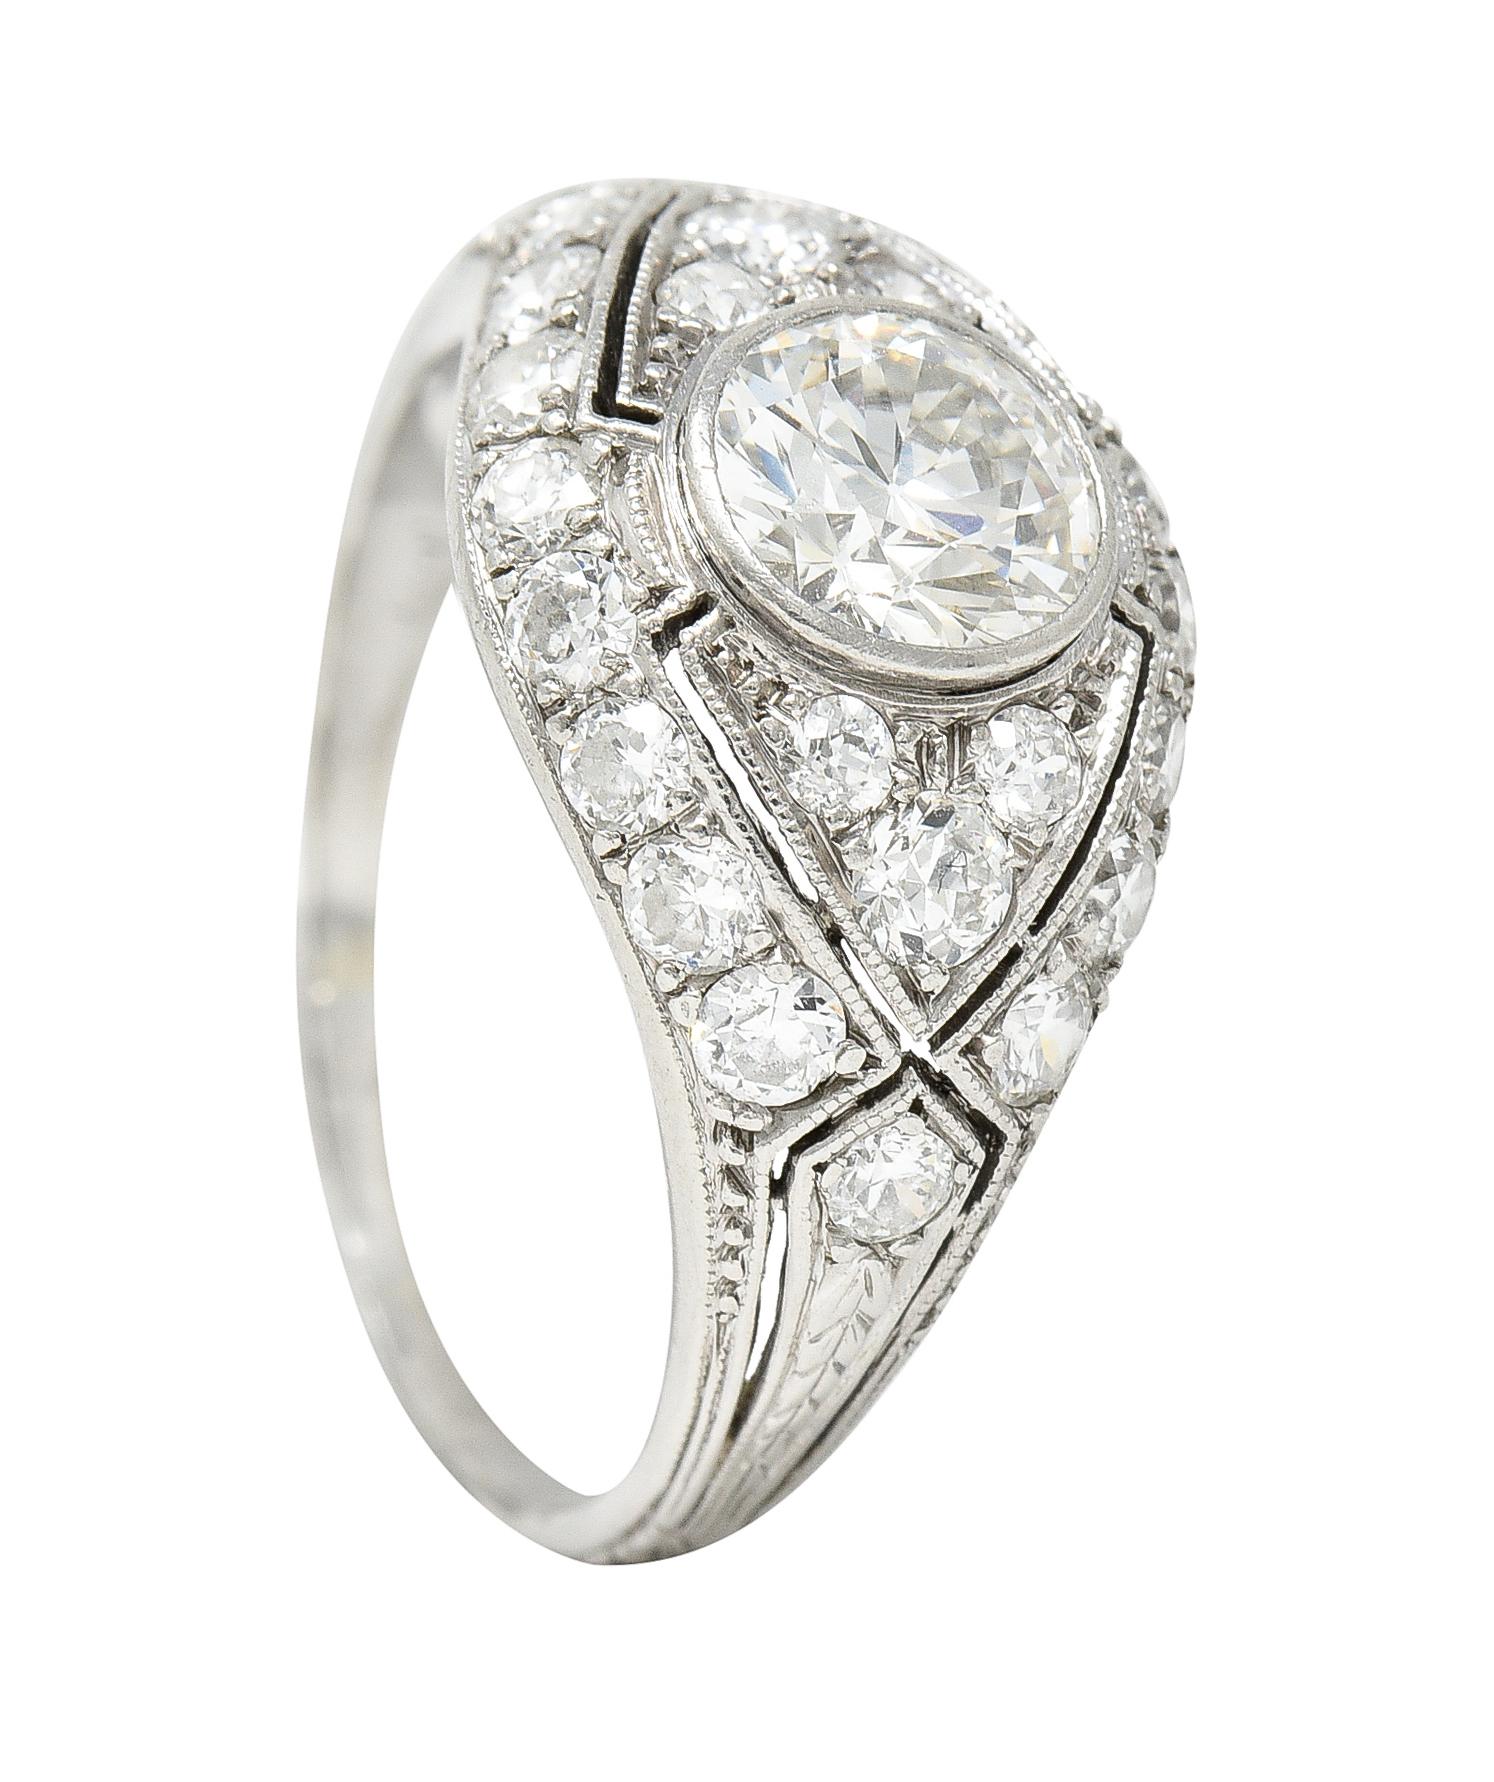 Marcus and Co. Art Deco 1.95 Carats Diamond Platinum Bombè Band Engagement Ring For Sale 3